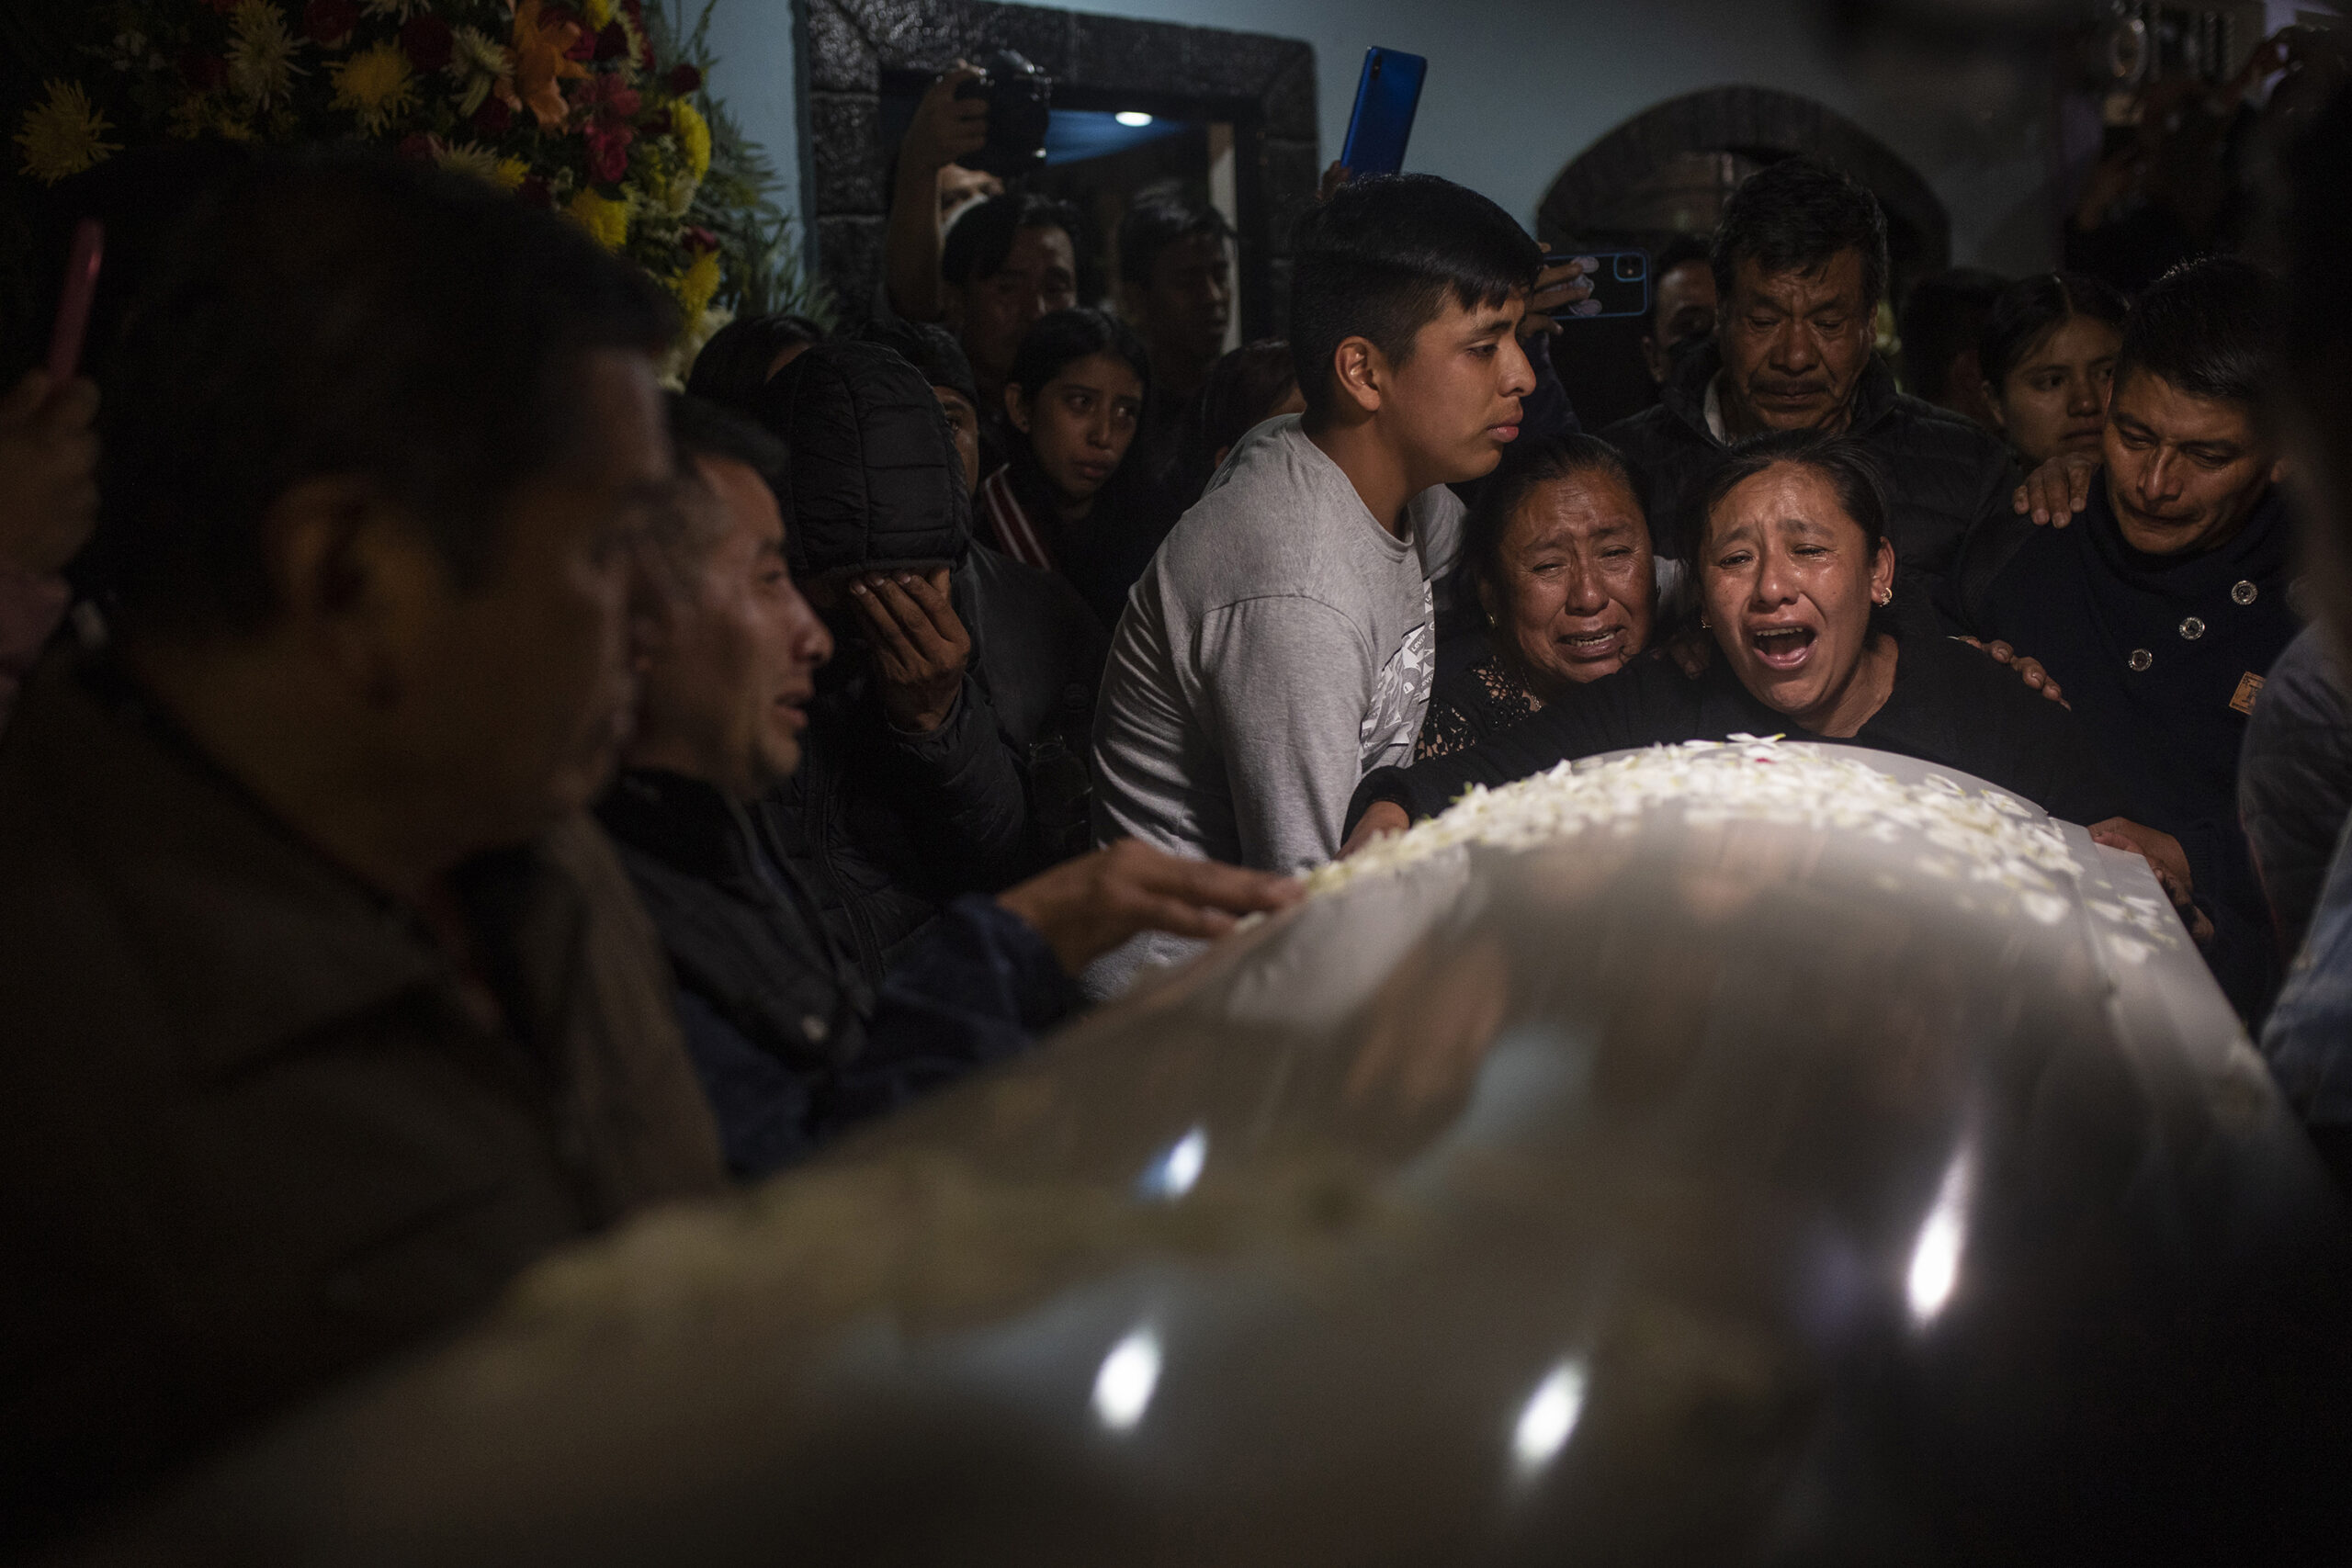 Relatives and friends react as the bodies of Jair Valencia, Misael Olivares, and Yovani Valencia arrive to their family house in San Marcos Atexquilapan, Veracruz, Mexico on July 13, 2022. The three were among a group of migrants who died of heat and dehydration in a locked trailer-truck abandoned by smugglers on the outskirts of San Antonio, Texas, on June 27.